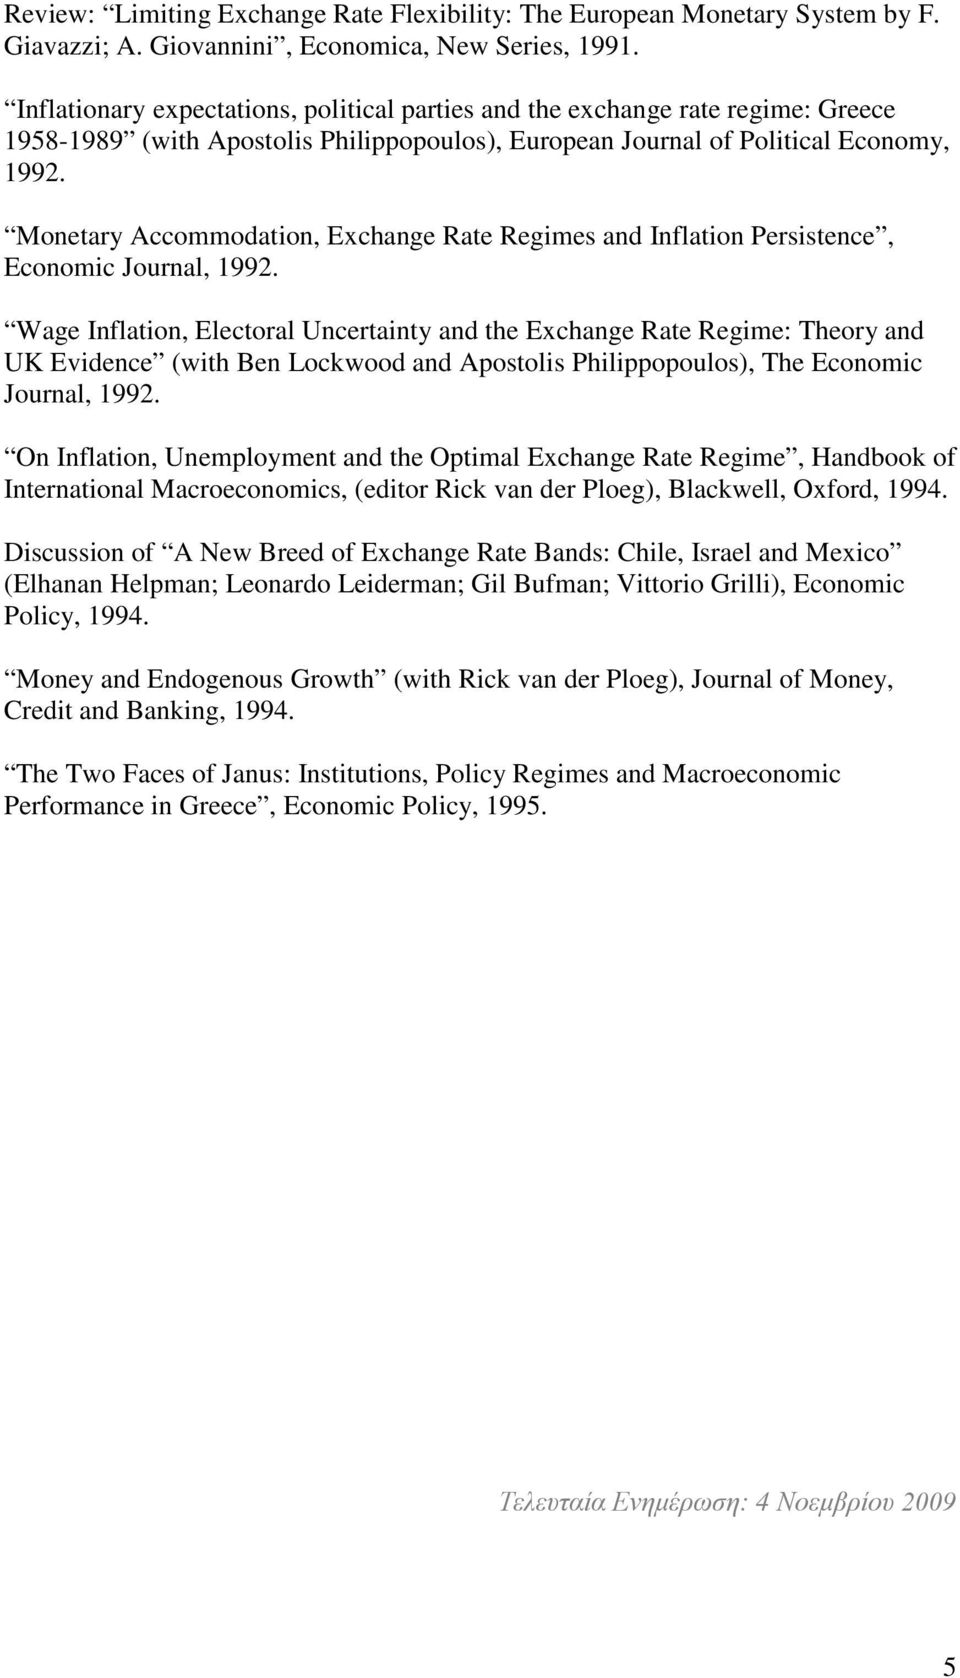 Monetary Accommodation, Exchange Rate Regimes and Inflation Persistence, Economic Journal, 1992.